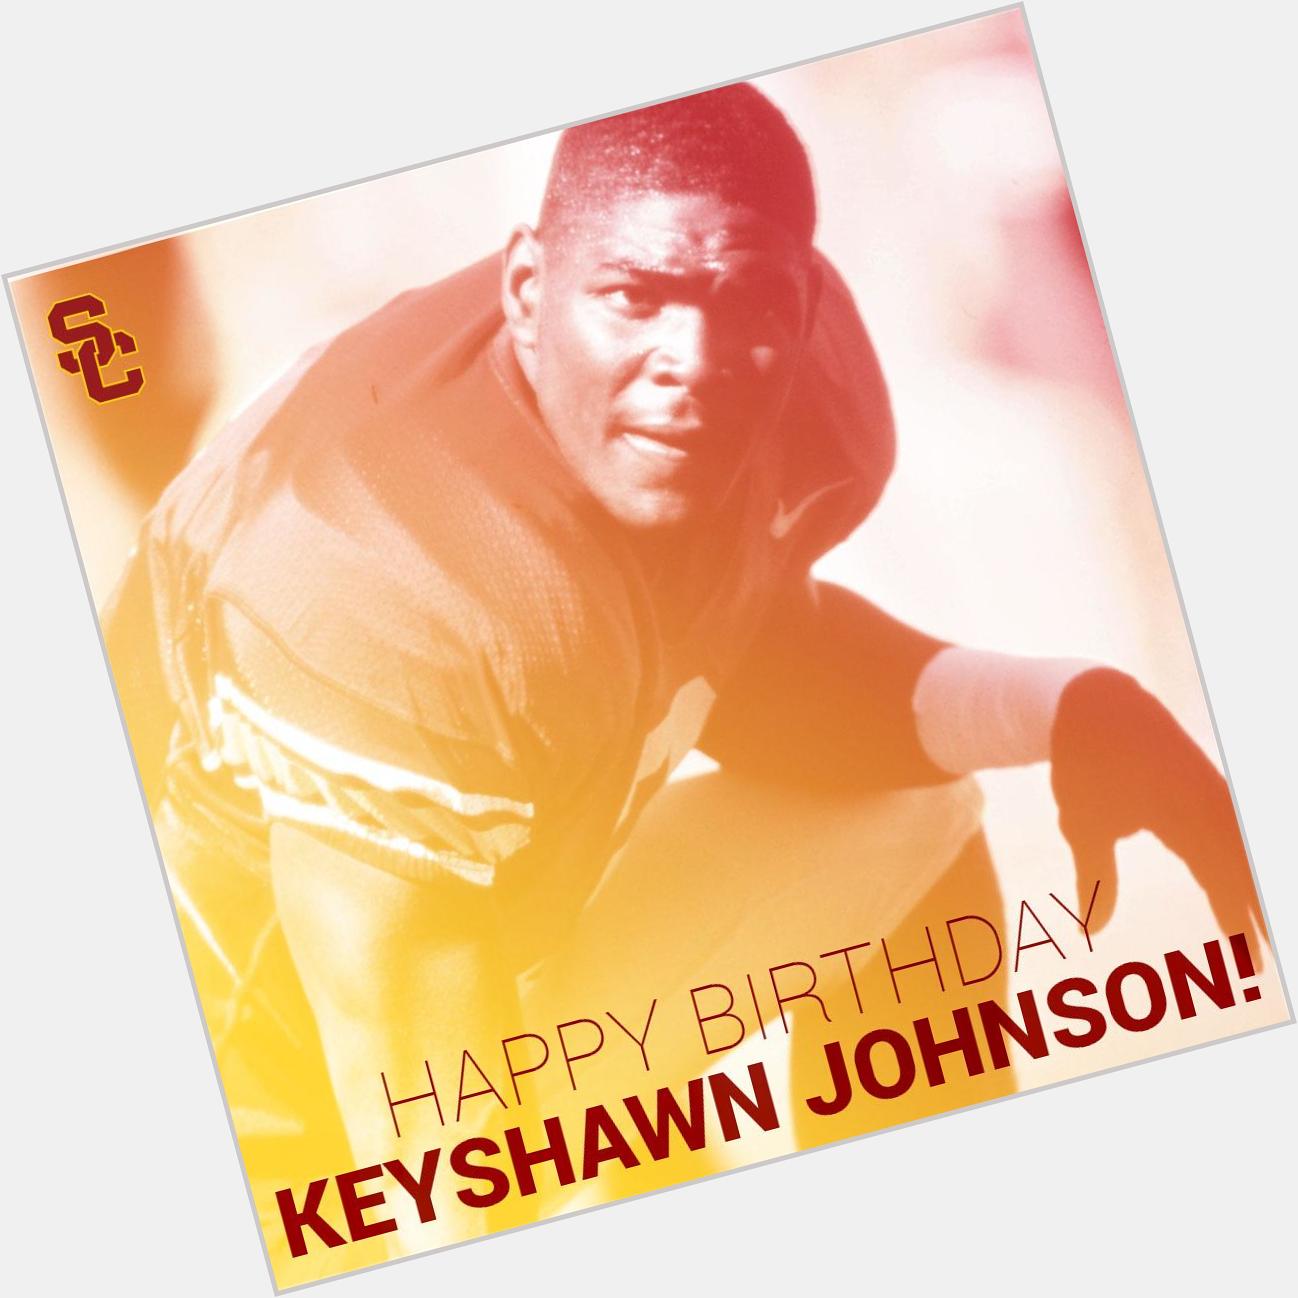 Happy Birthday Keyshawn Johnson!  In two bowl games at USC, he made a combined 20 catches for 438 yards and 4 TDs. 